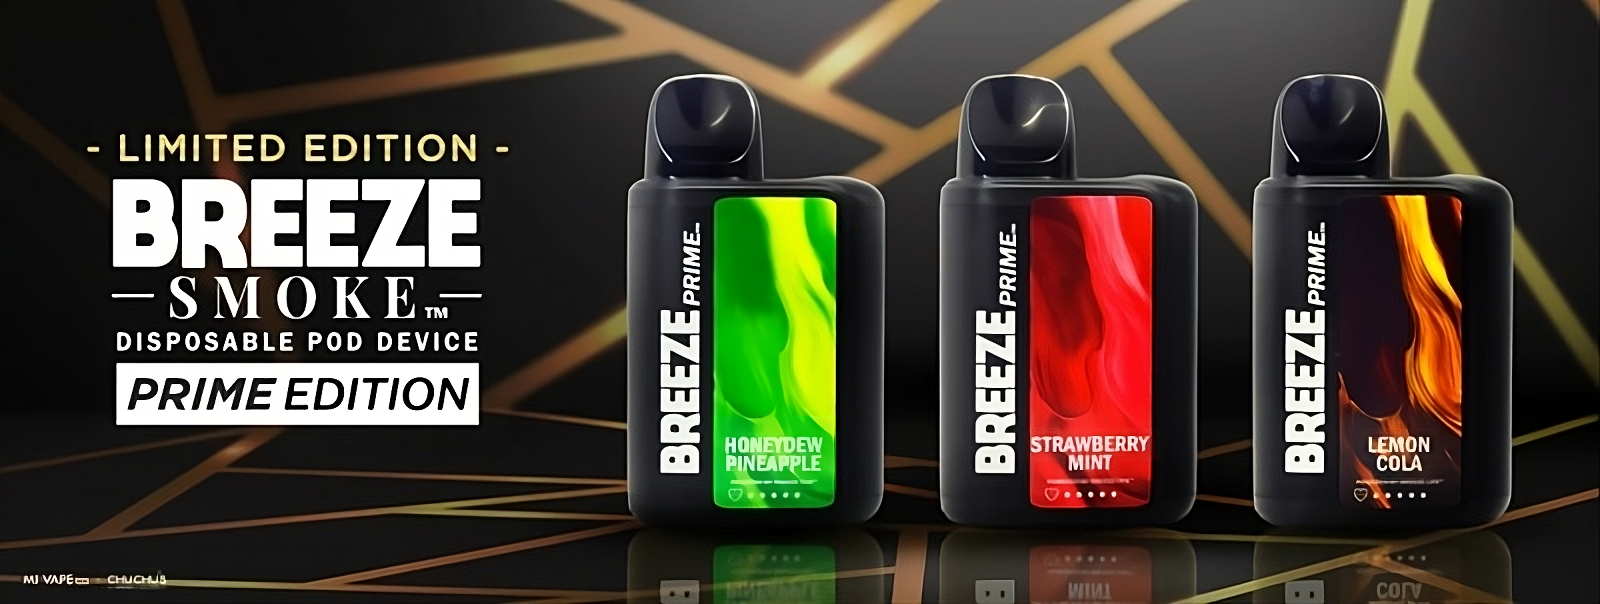 Breeze Prime Disposable vape might be the perfect choice for you. With an impressive 6000 puffs and a variety of flavors to choose from, the Breeze Prime provides a refreshing and satisfying vaping experience.